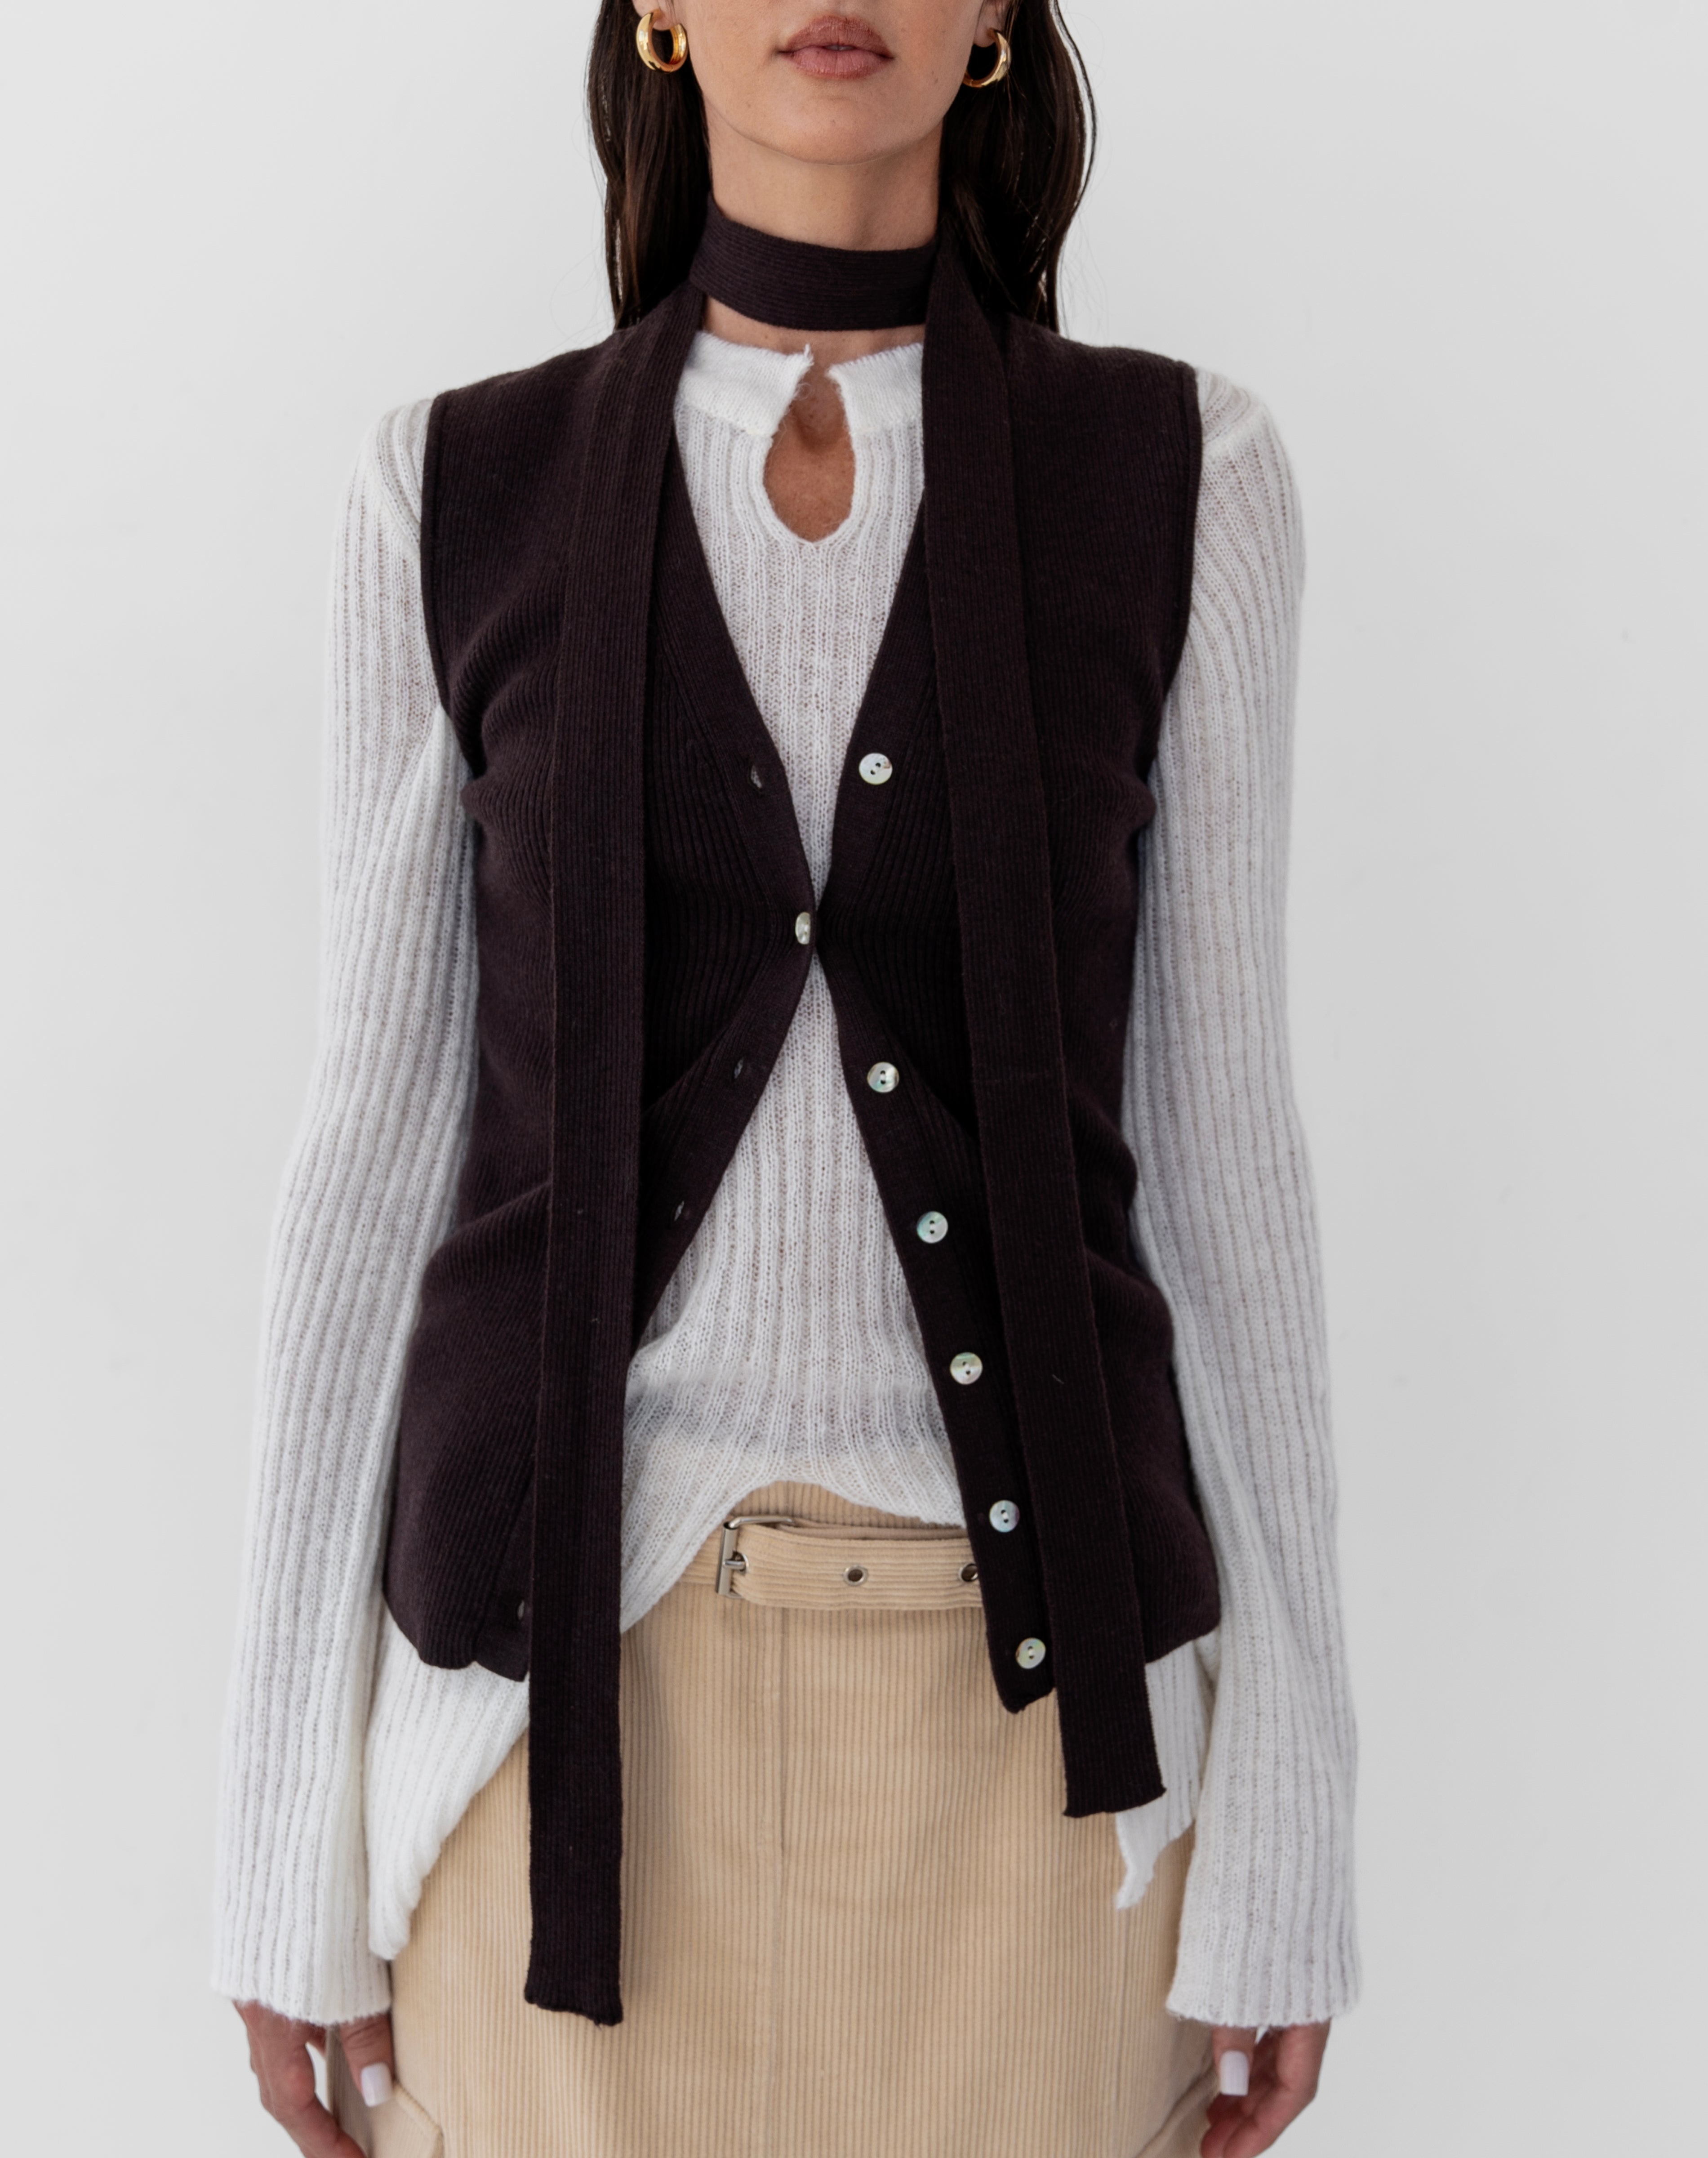 Darcy Knit Vest With A Scarf, Chocolate